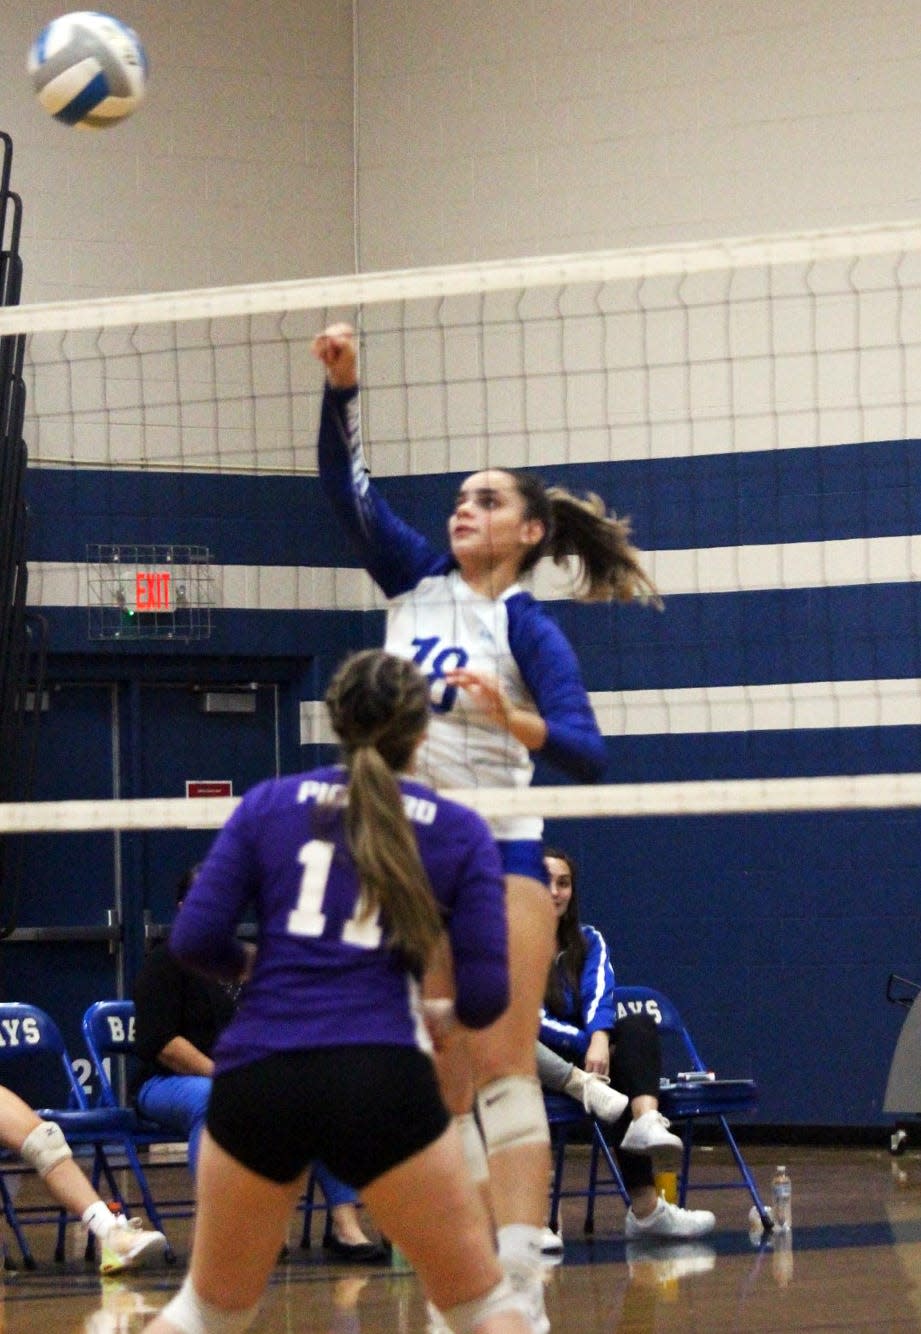 Brimley senior Lindsey Hill slams one home during the 2022 volleyball season.